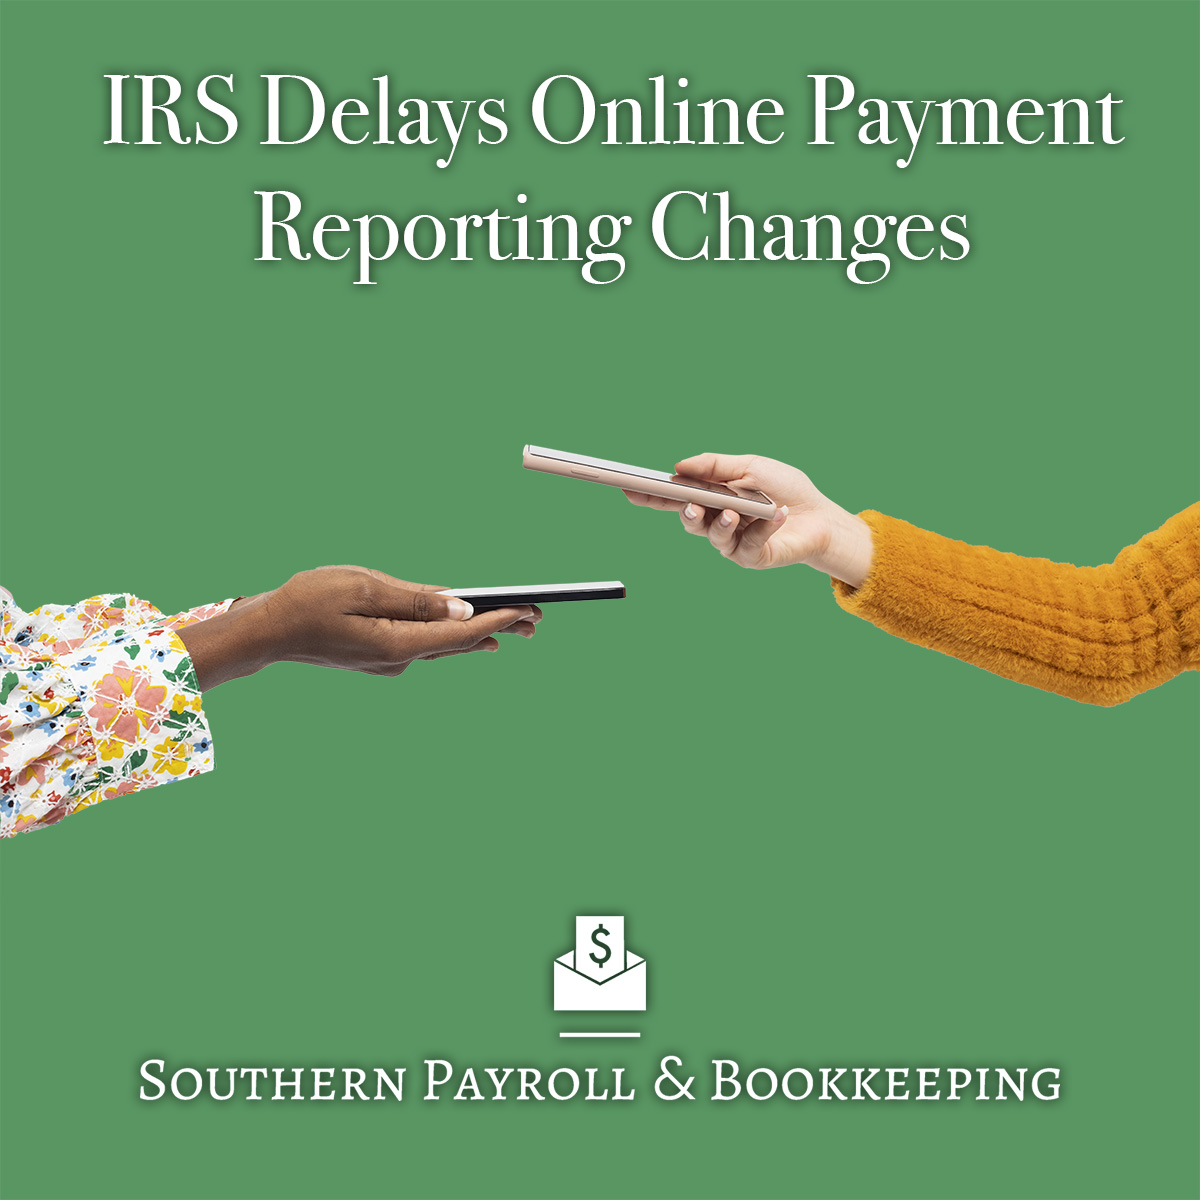 IRS Delays Online Payment Reporting Changes